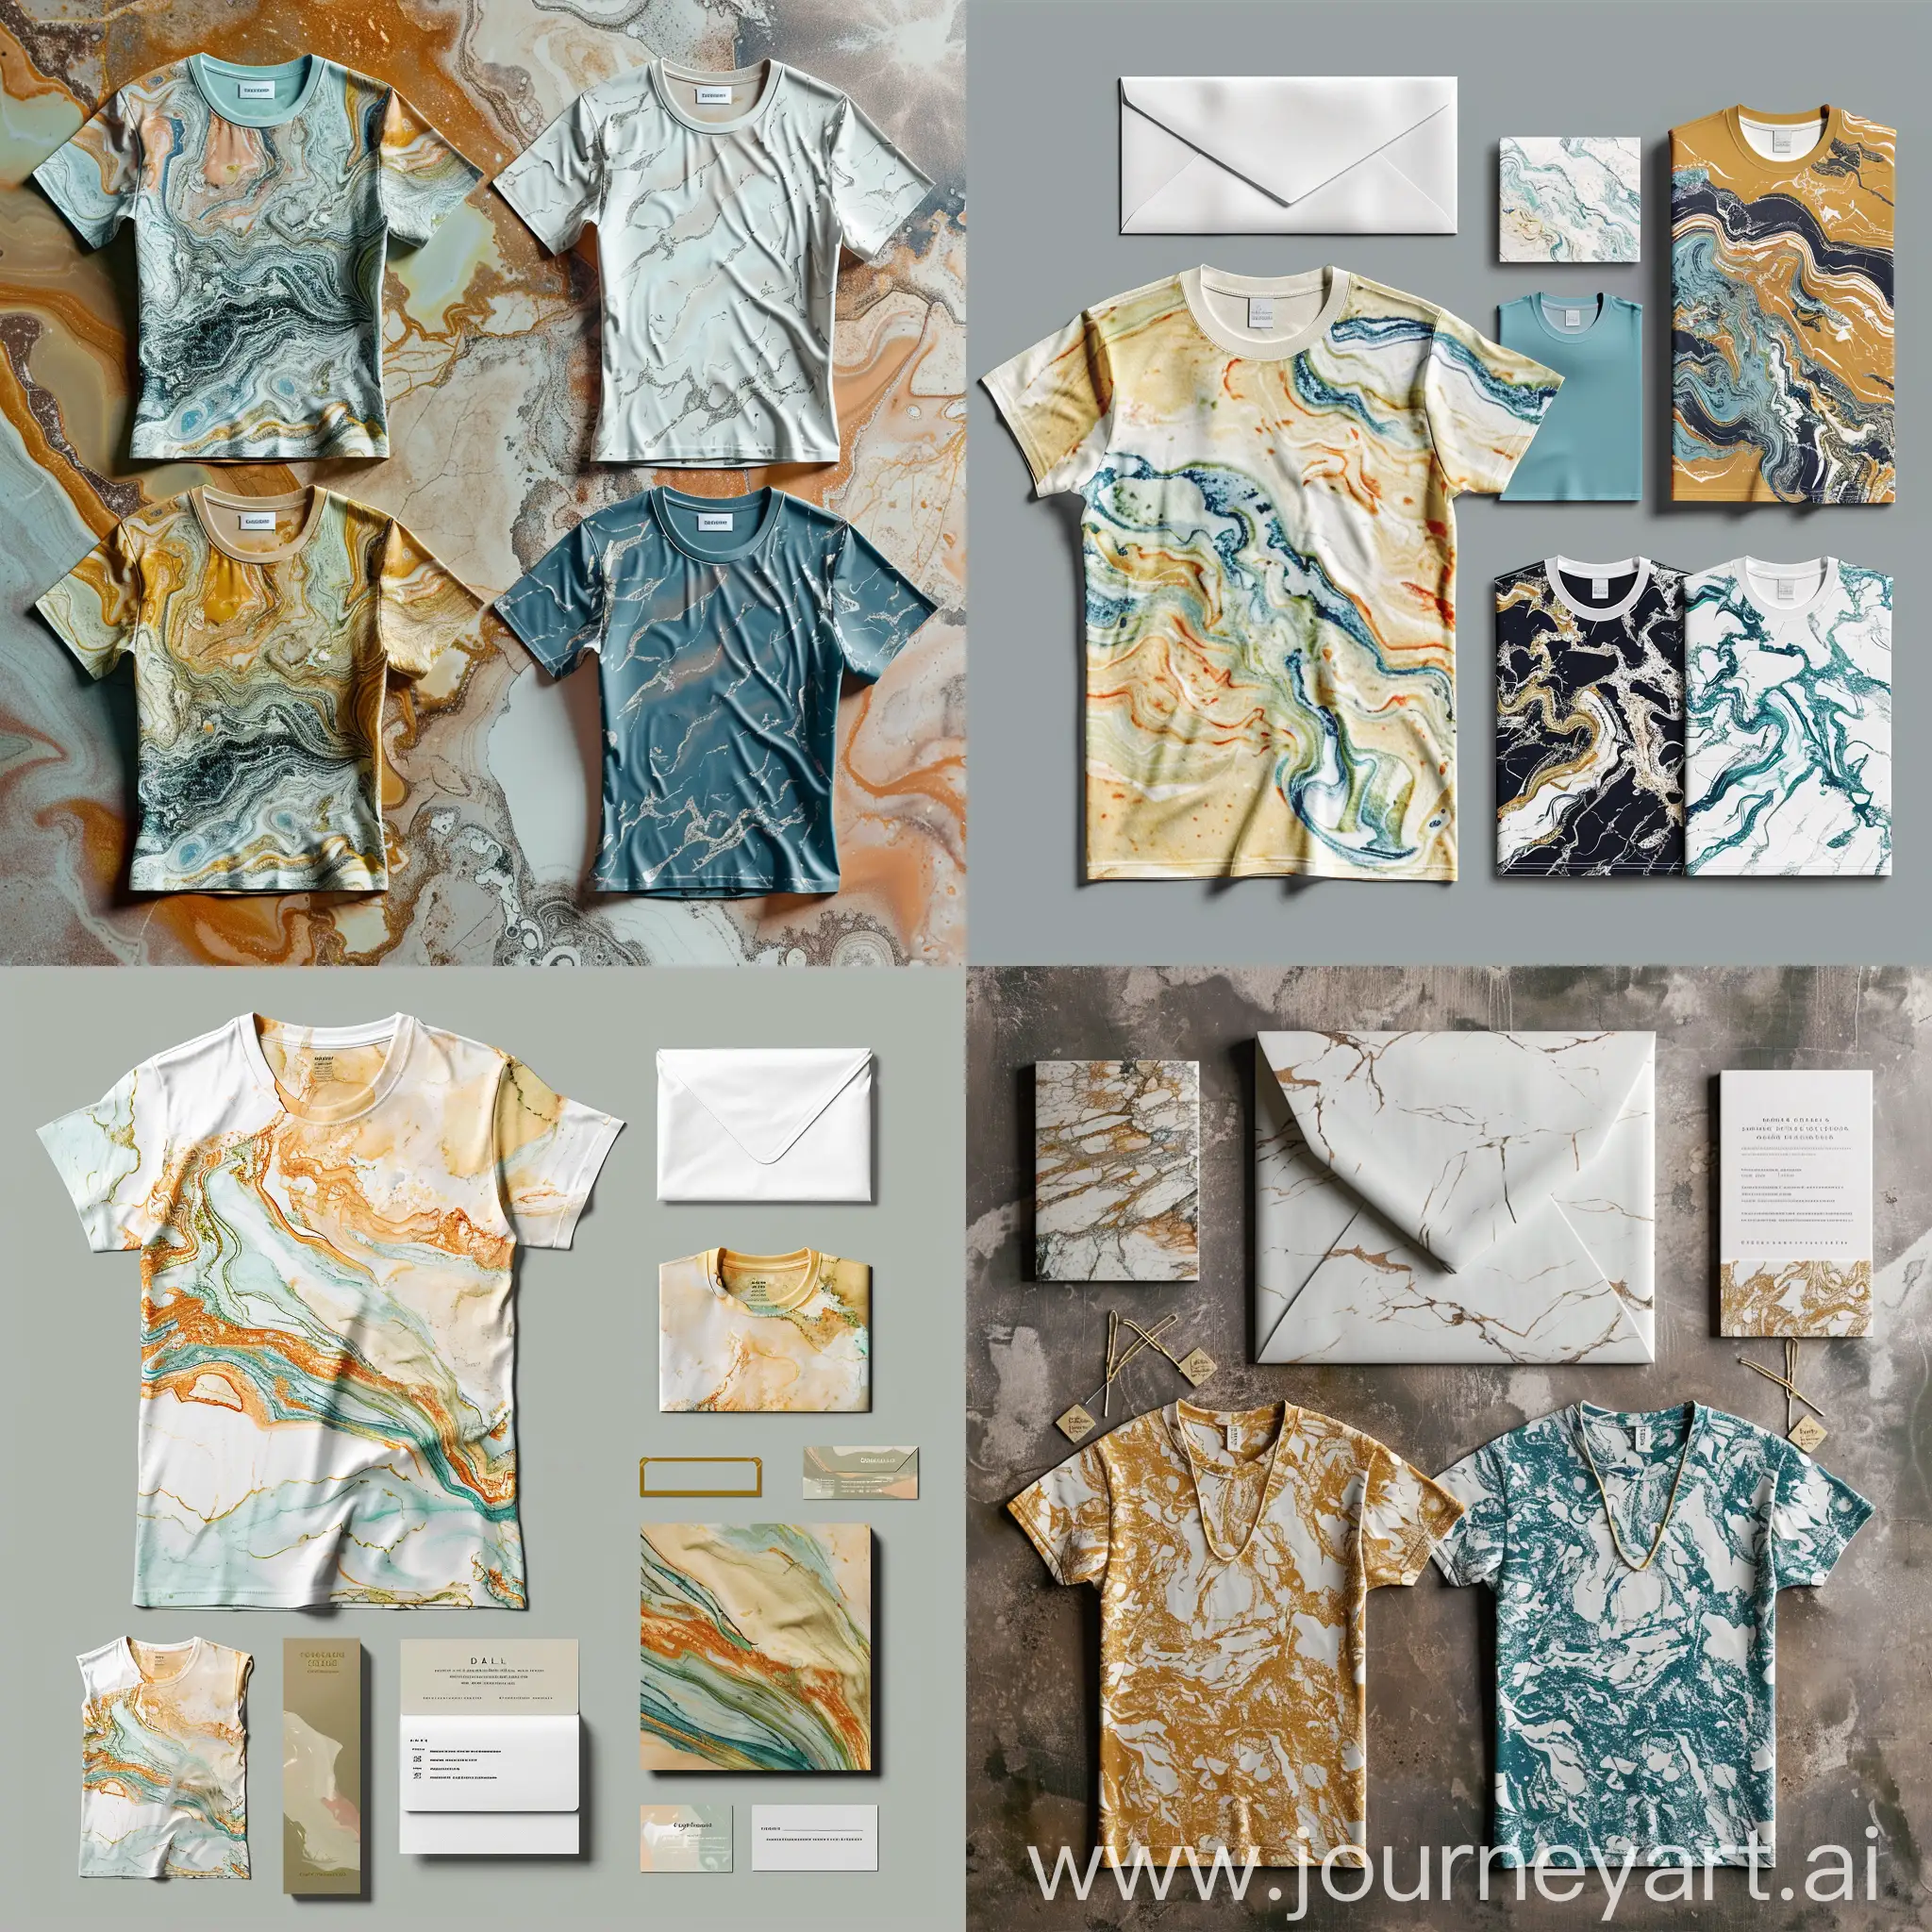 Marble-Inspired T-shirt Design (Seasonal): Create a T-shirt design that reflects the natural patterns of marble for both summer and winter seasons. Use lighter and vibrant tones for the summer version and deeper, richer colors for the winter version.  DALL-E Prompt: "Design a corporate identity for a marble company including the following items:  T-shirt Design (Summer/Winter) Diplomat Envelope Business Card Letterhead Folder Employee ID Card Accounting Documents (Invoice, Receipt, etc.) Establishing Corporate Colors Email Signature Design"